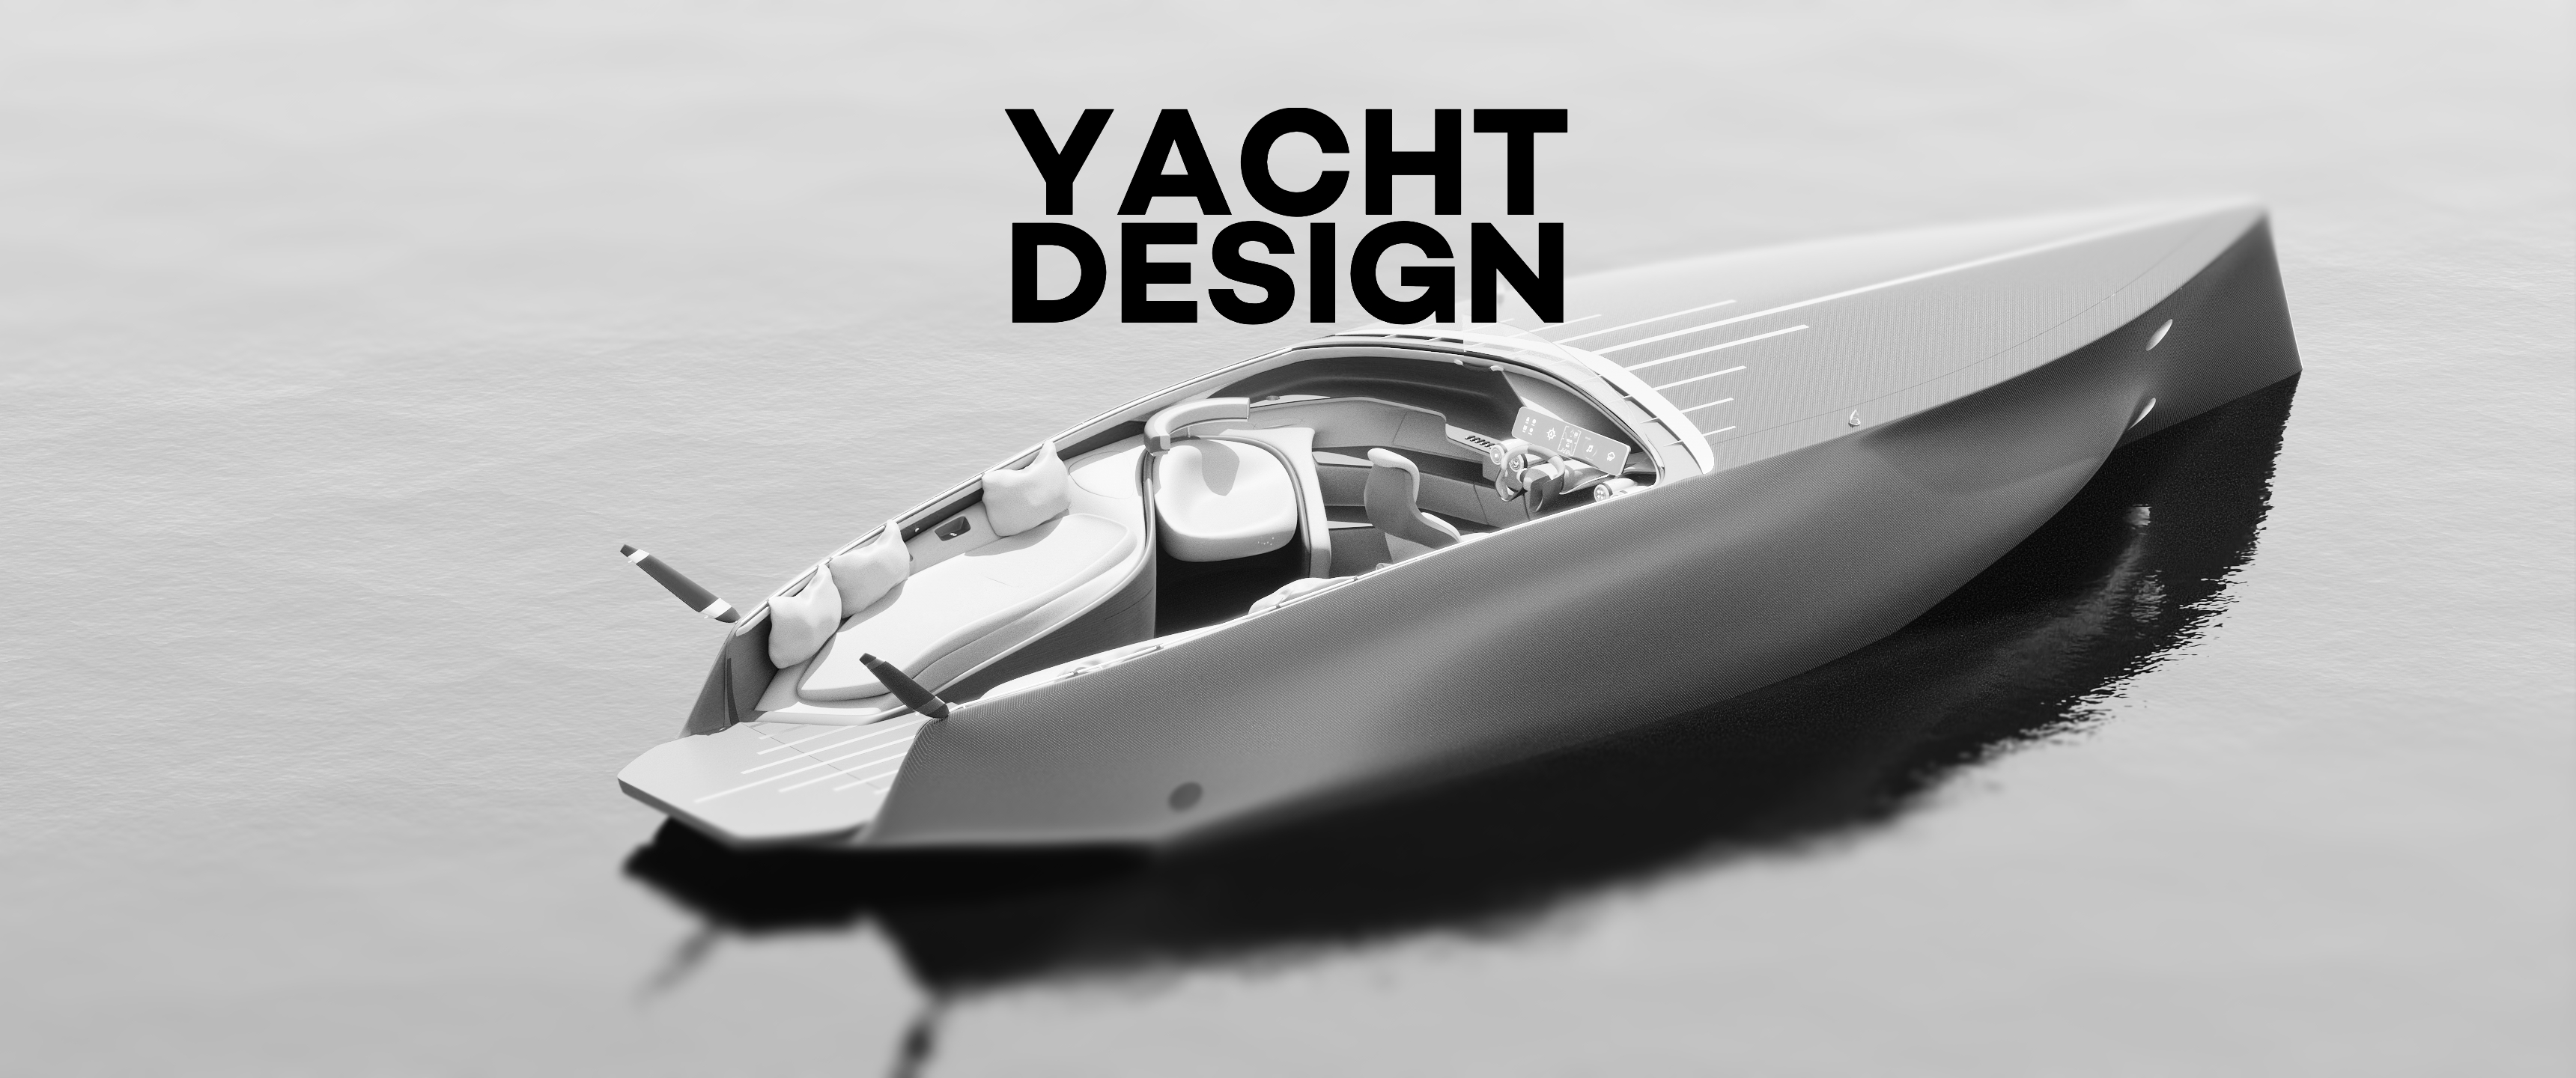 Yacht design projects and works